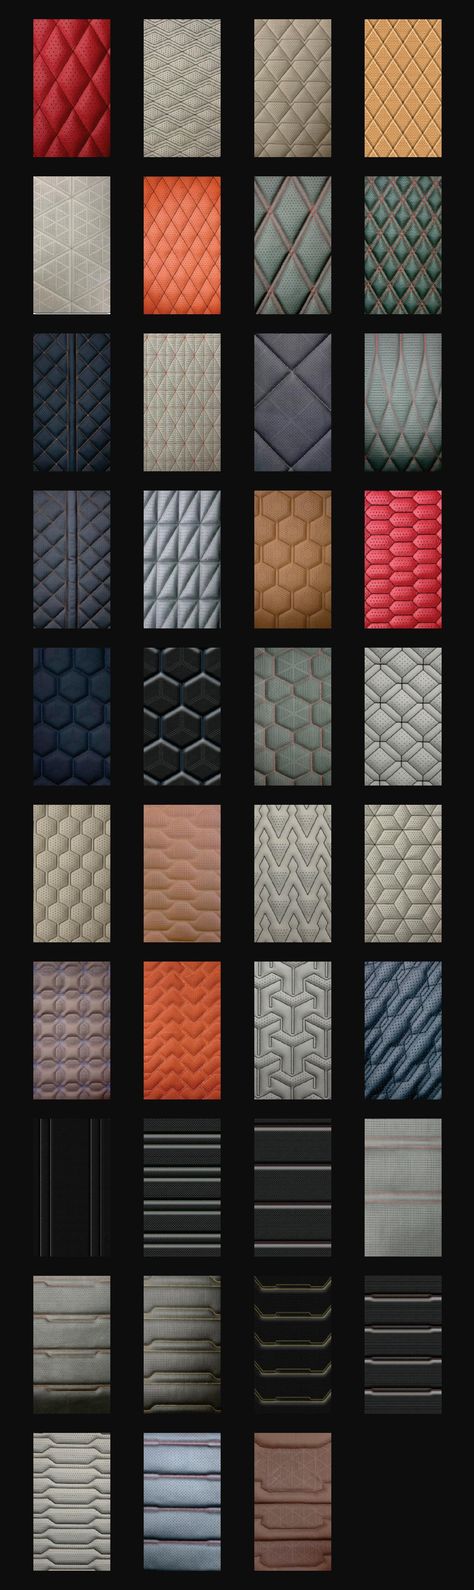 LEATHER UPGRADES — BLACKMANS LEATHER GEELONG Leather Print Pattern, Leather Architecture, Leather Panelling, Leather Interior Design, Leather Wall Panels, Types Of Vehicles, Car Interior Upholstery, Materials Board Interior Design, Automotive Upholstery